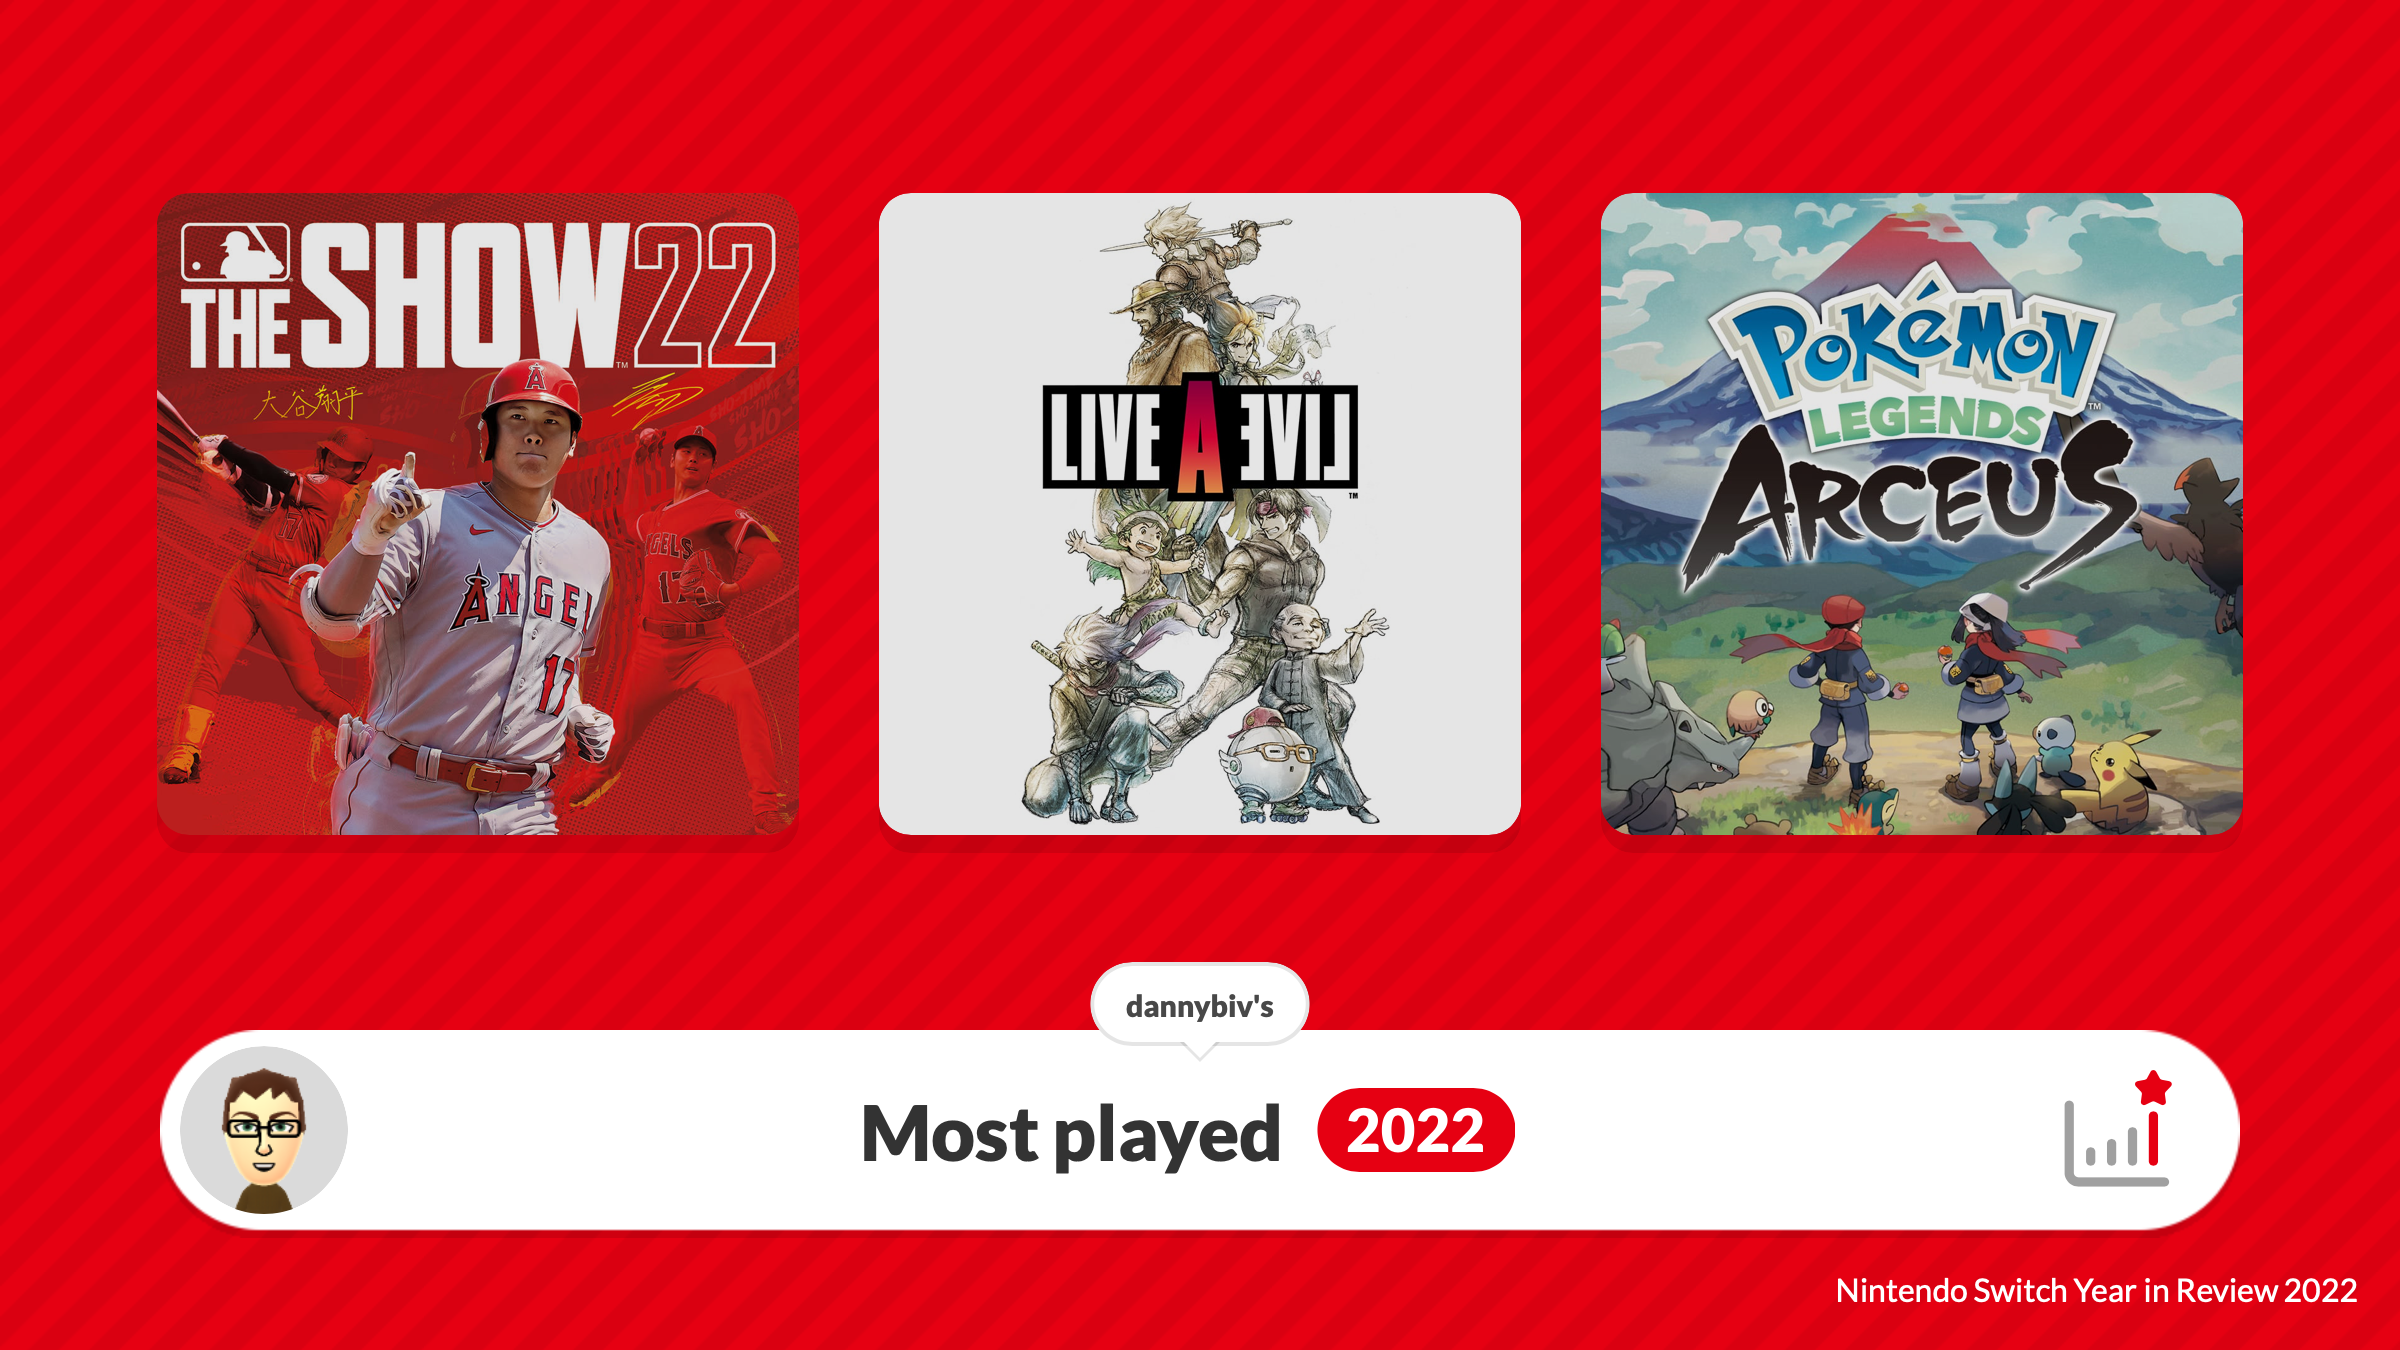 Check out your Nintendo Switch Year in Review 2022!